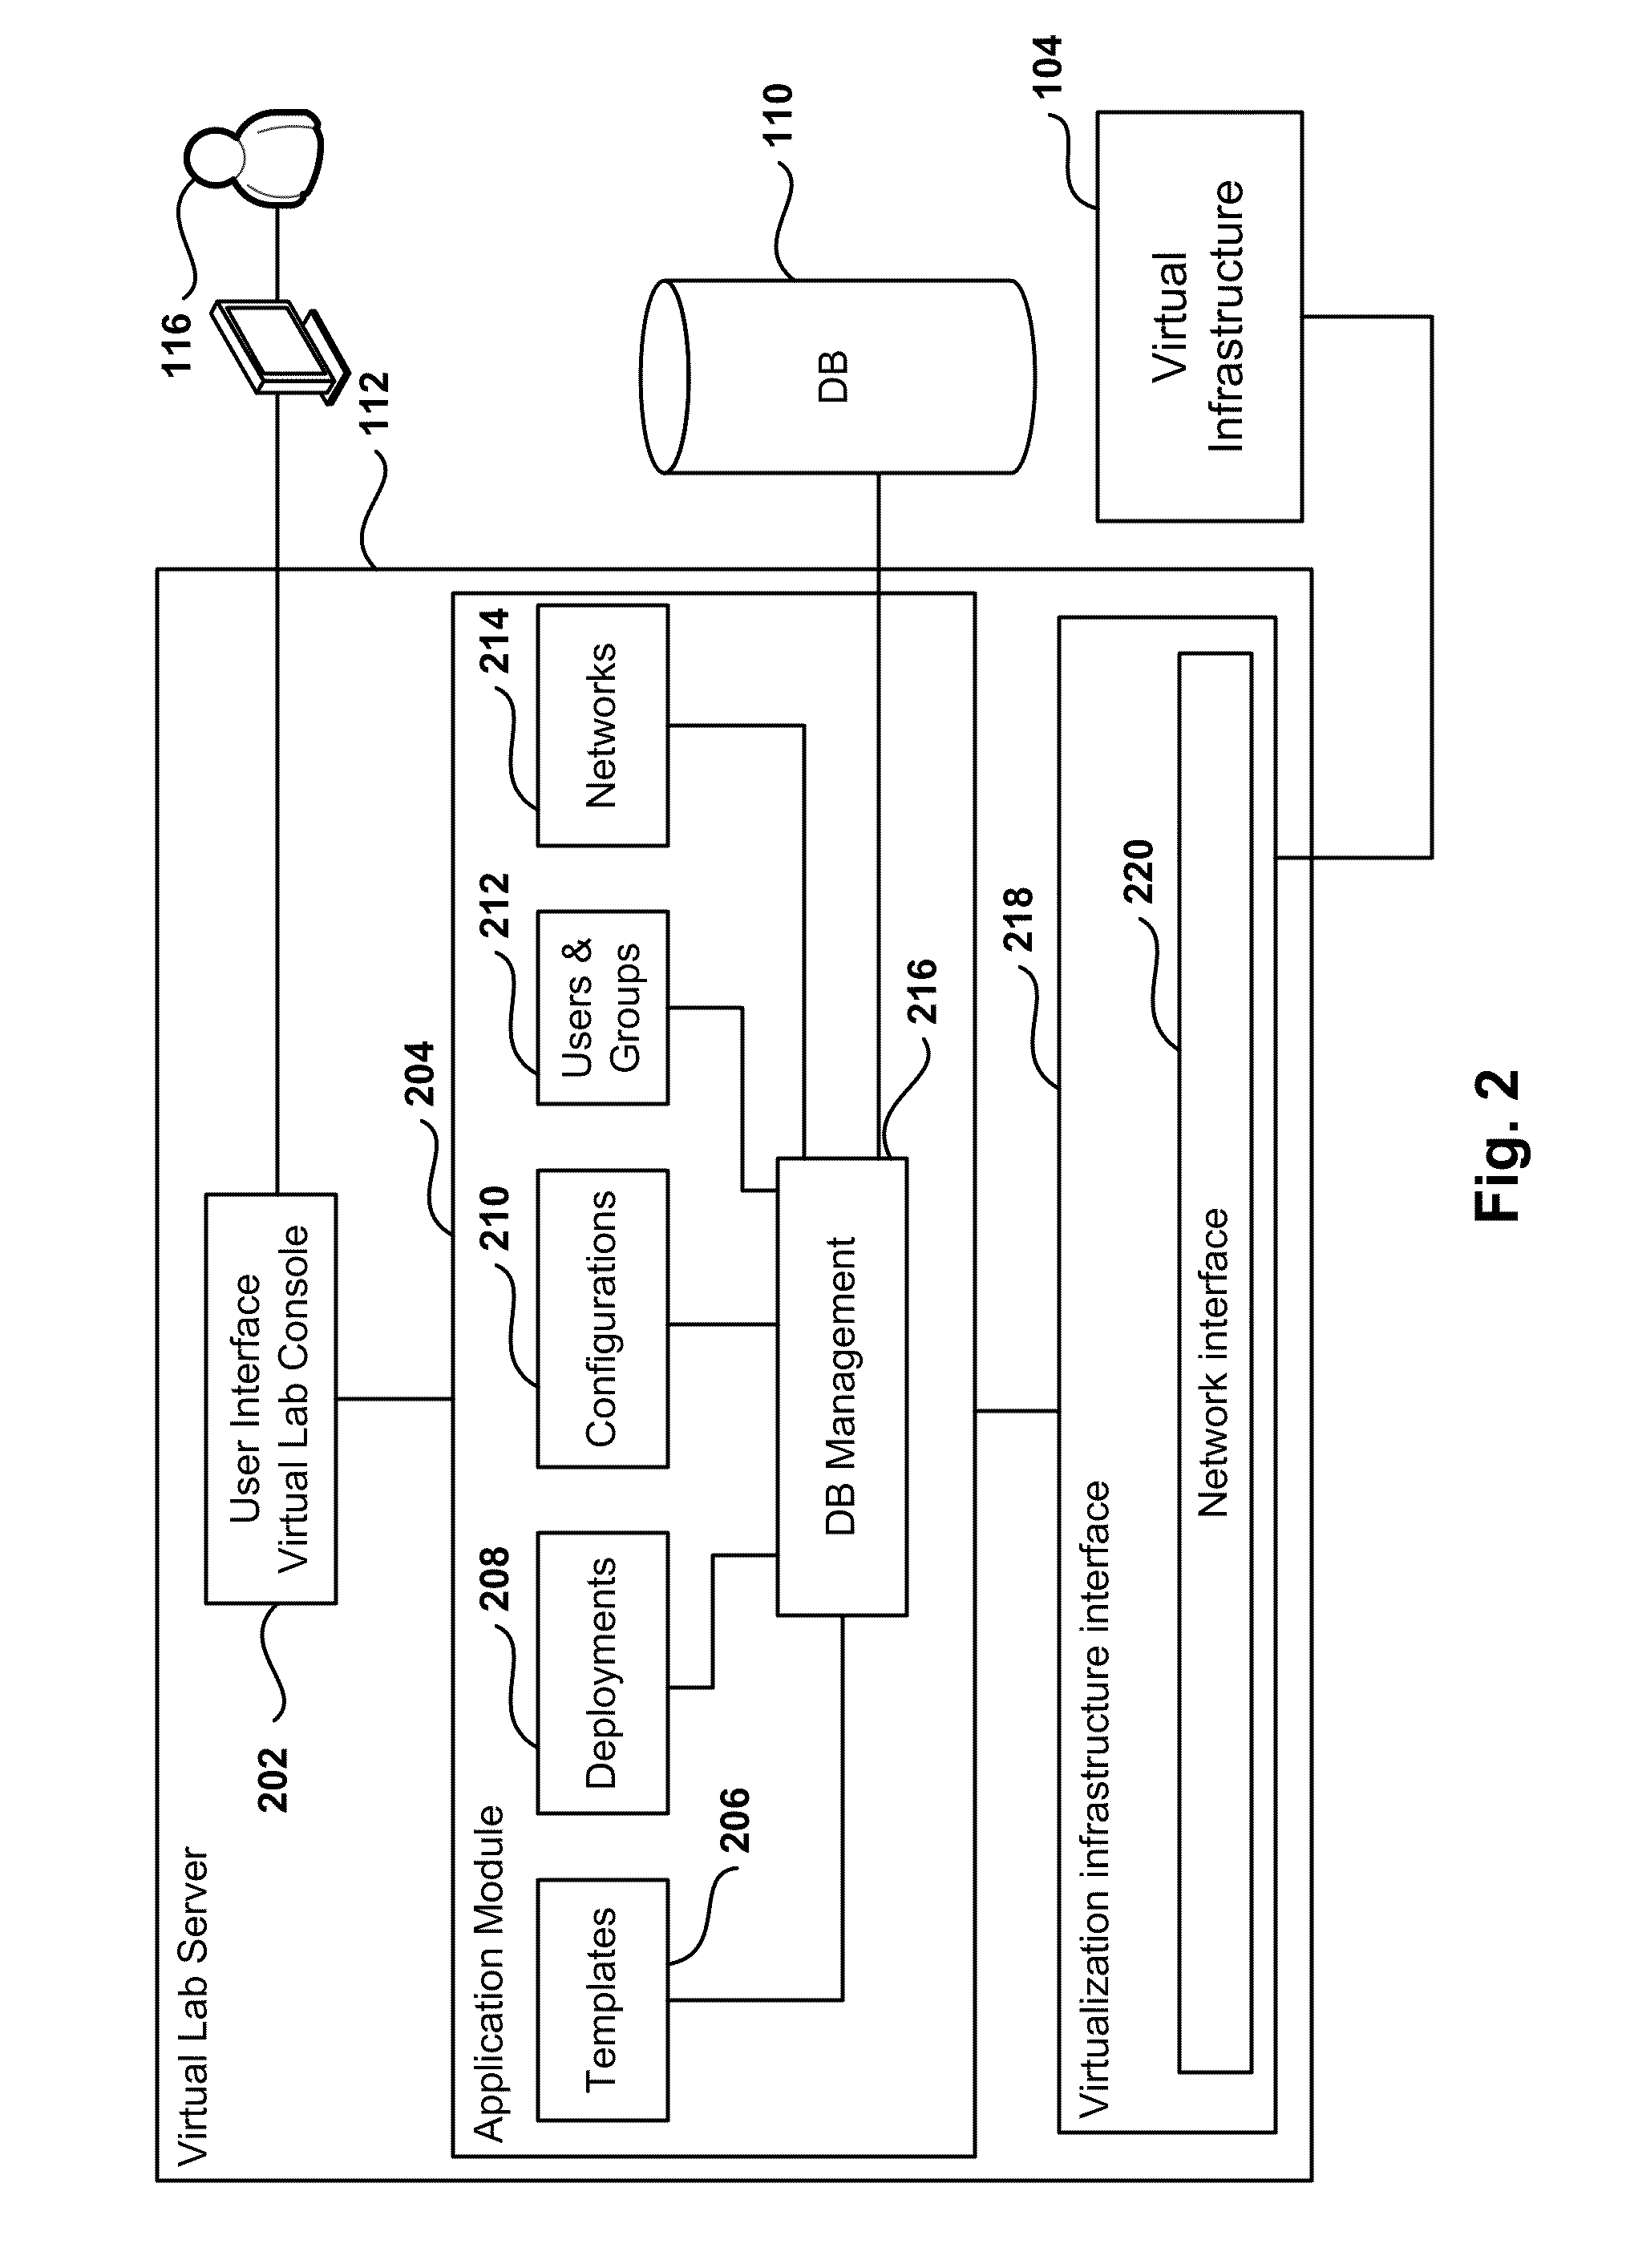 Automated Network Configuration of Virtual Machines in a Virtual Lab Environment